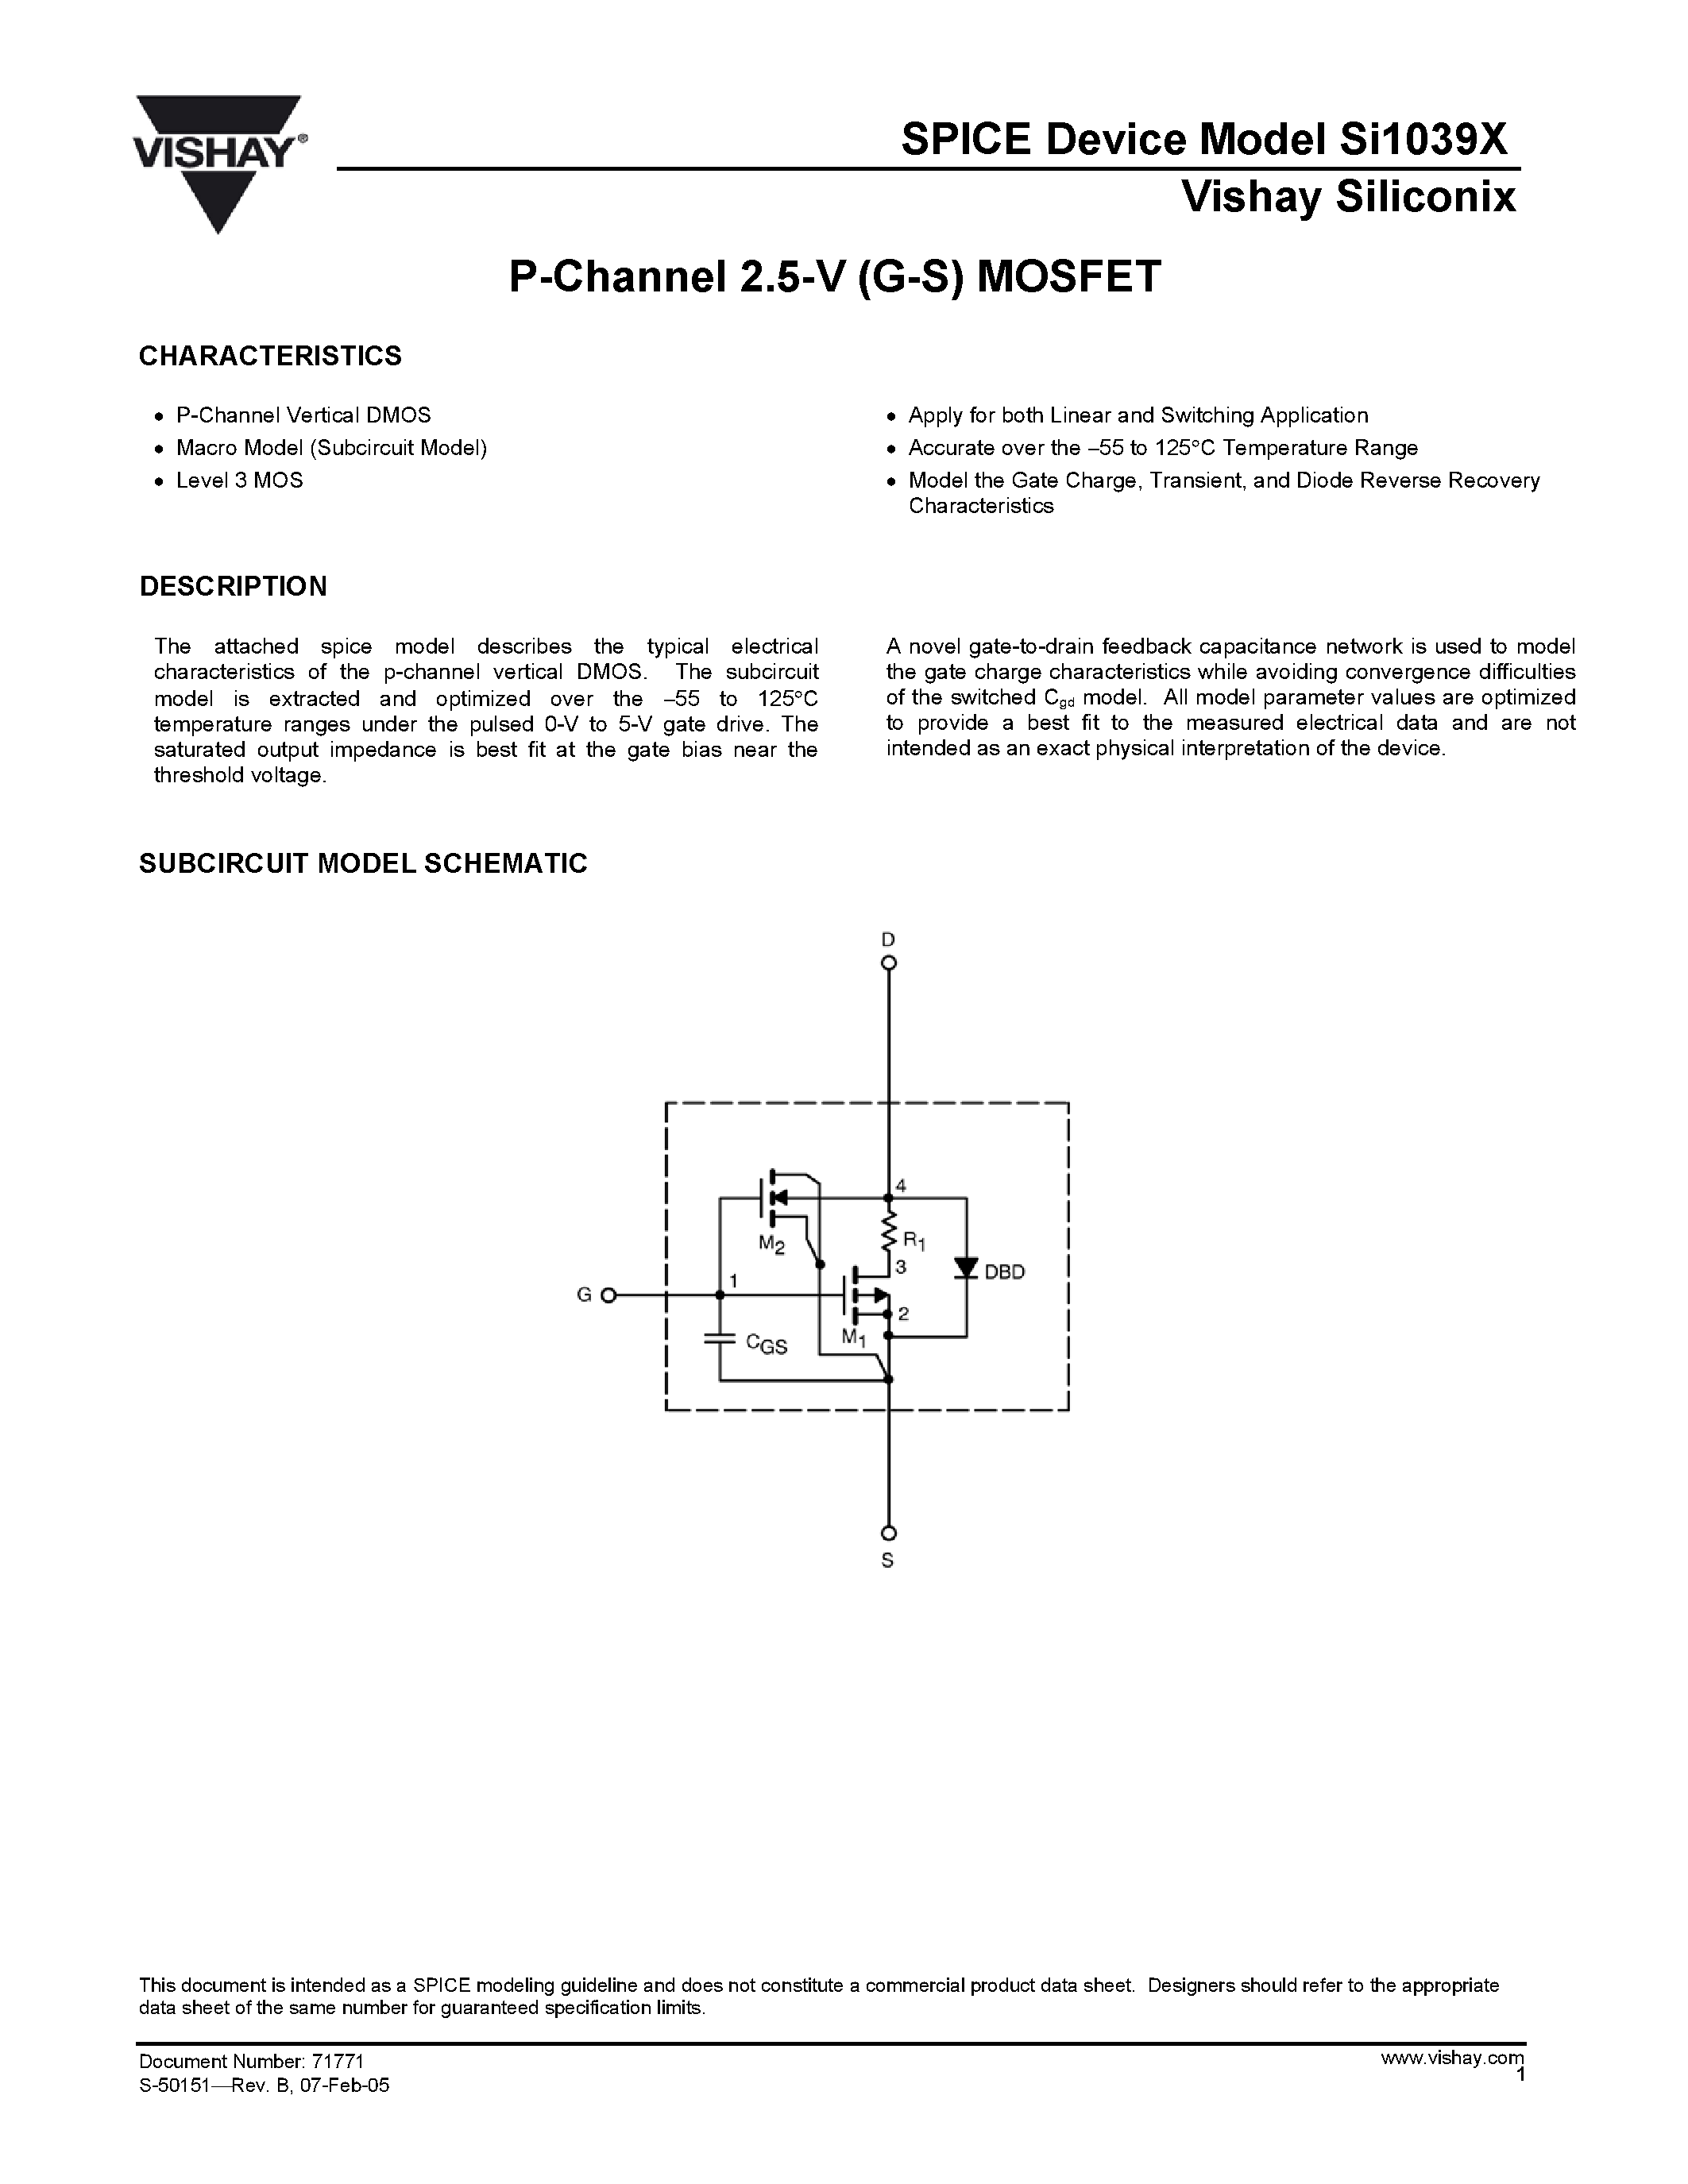 Даташит Si1039X-T1 - P-Channel 1.8-V (G-S) MOSFET страница 1